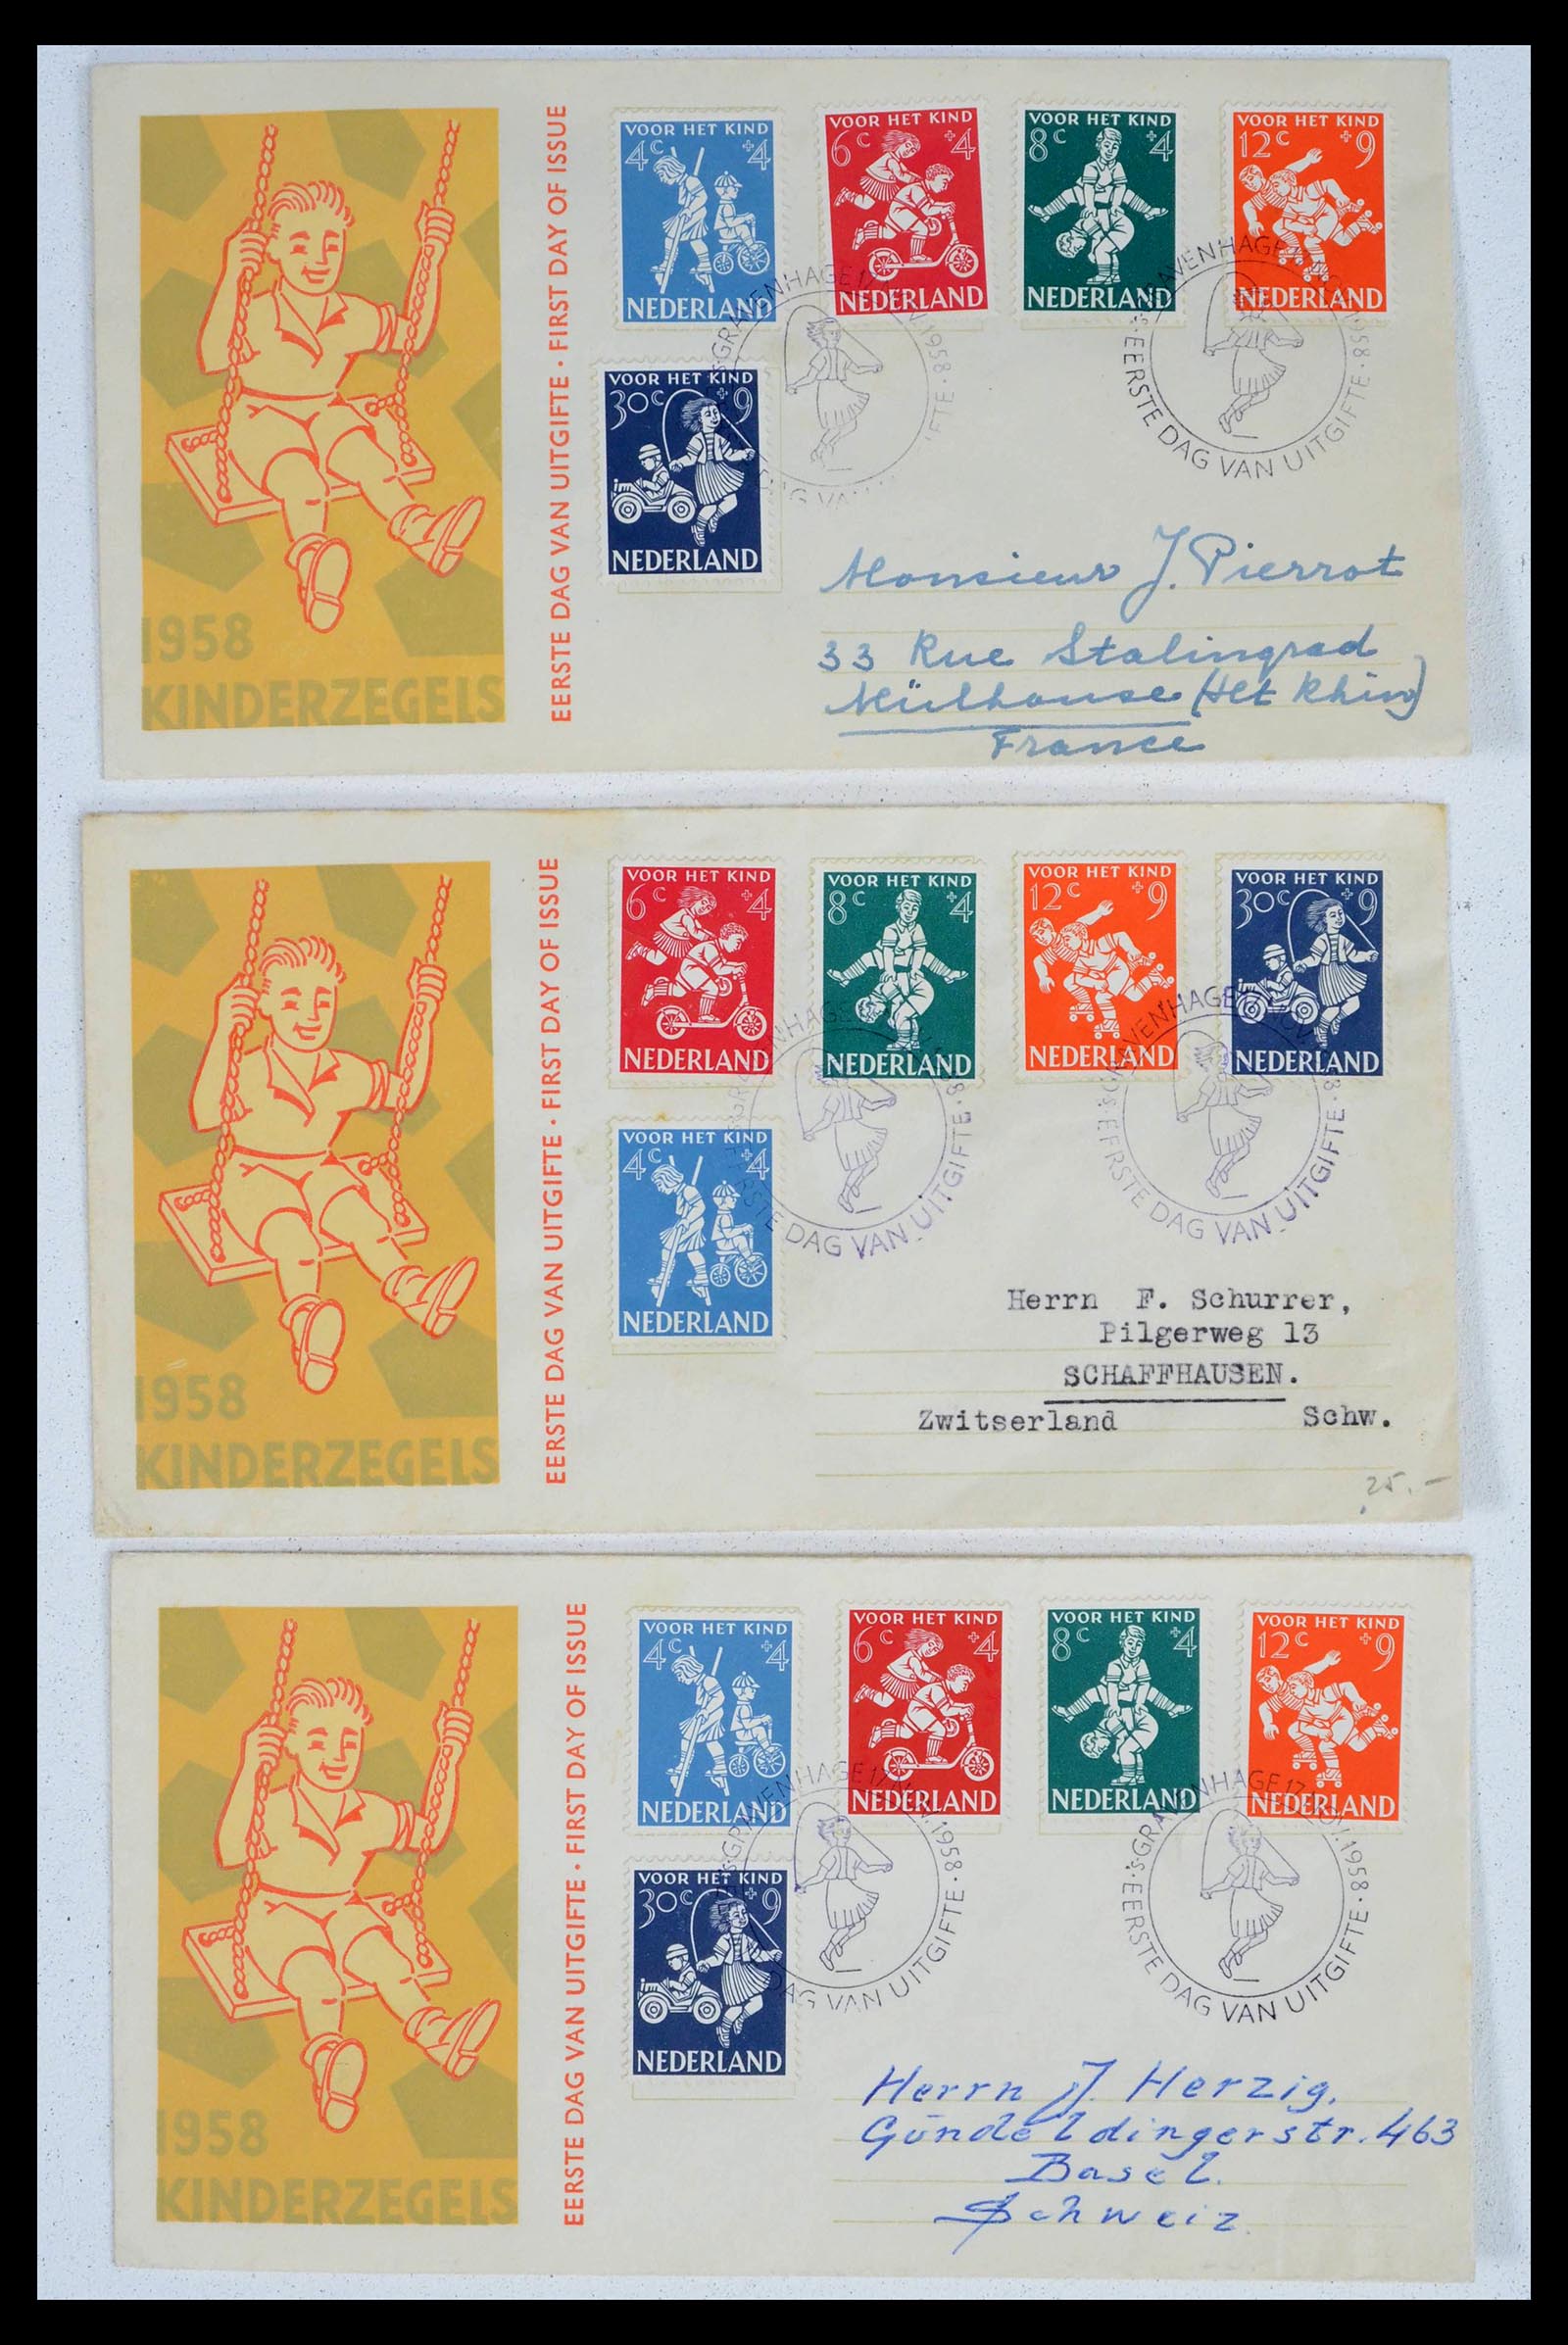 39474 0020 - Stamp collection 39474 Netherlands FDC's 1950-1960.